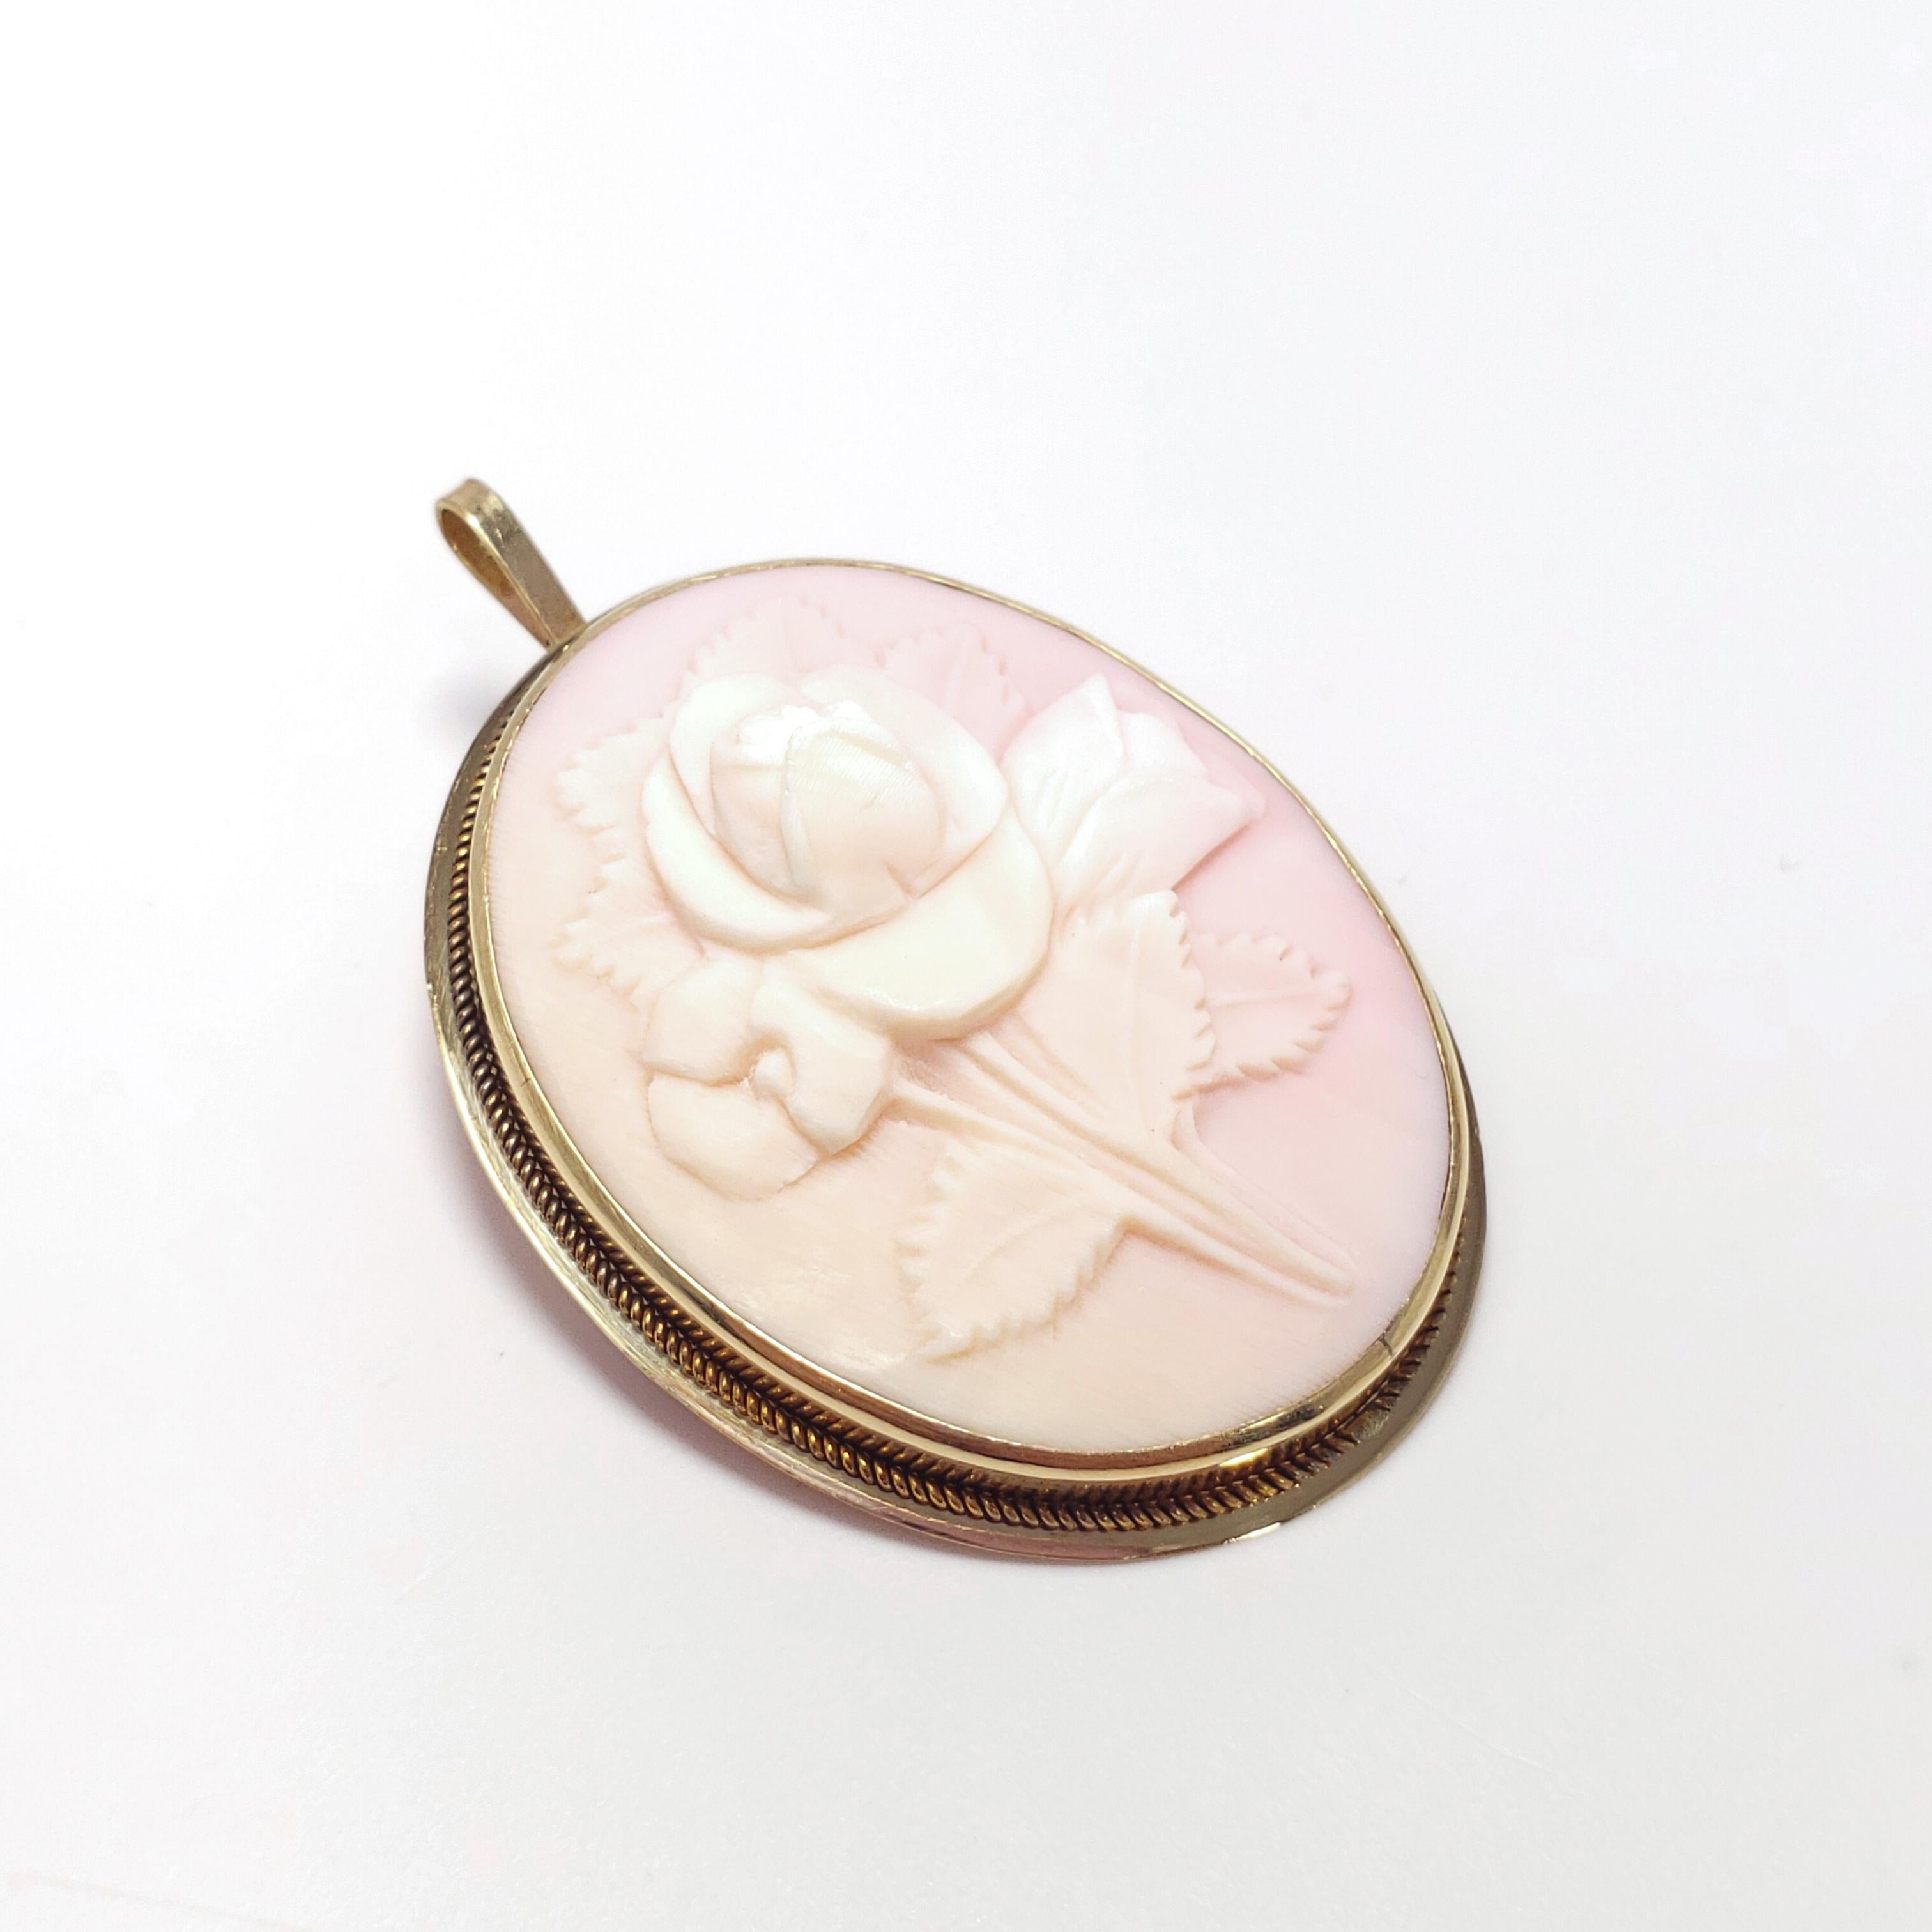 An angel-skin coral cameo that can be worn as both a brooch/pin and a pendant. Real white & soft pink colored angel skin coral. An elevated floral bouquet motif is carved in the coral, set in an accented, open back, 14K gold bezel. A quintessential